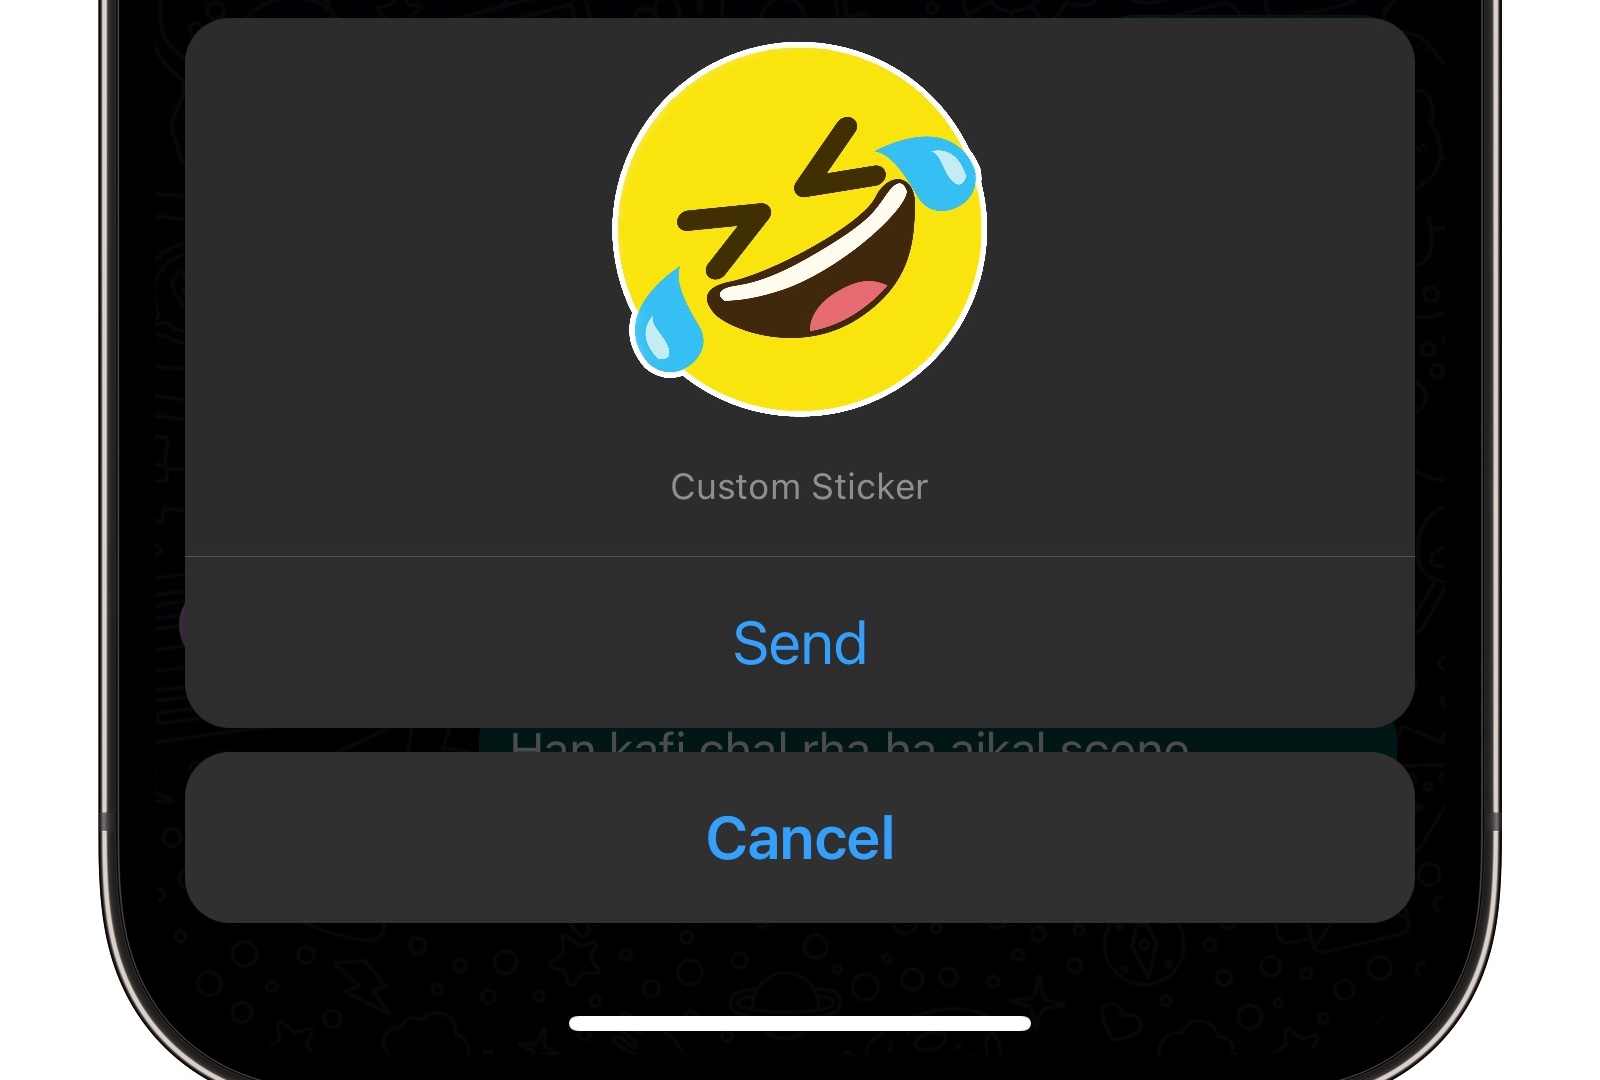 How to send stickers in WhatsApp